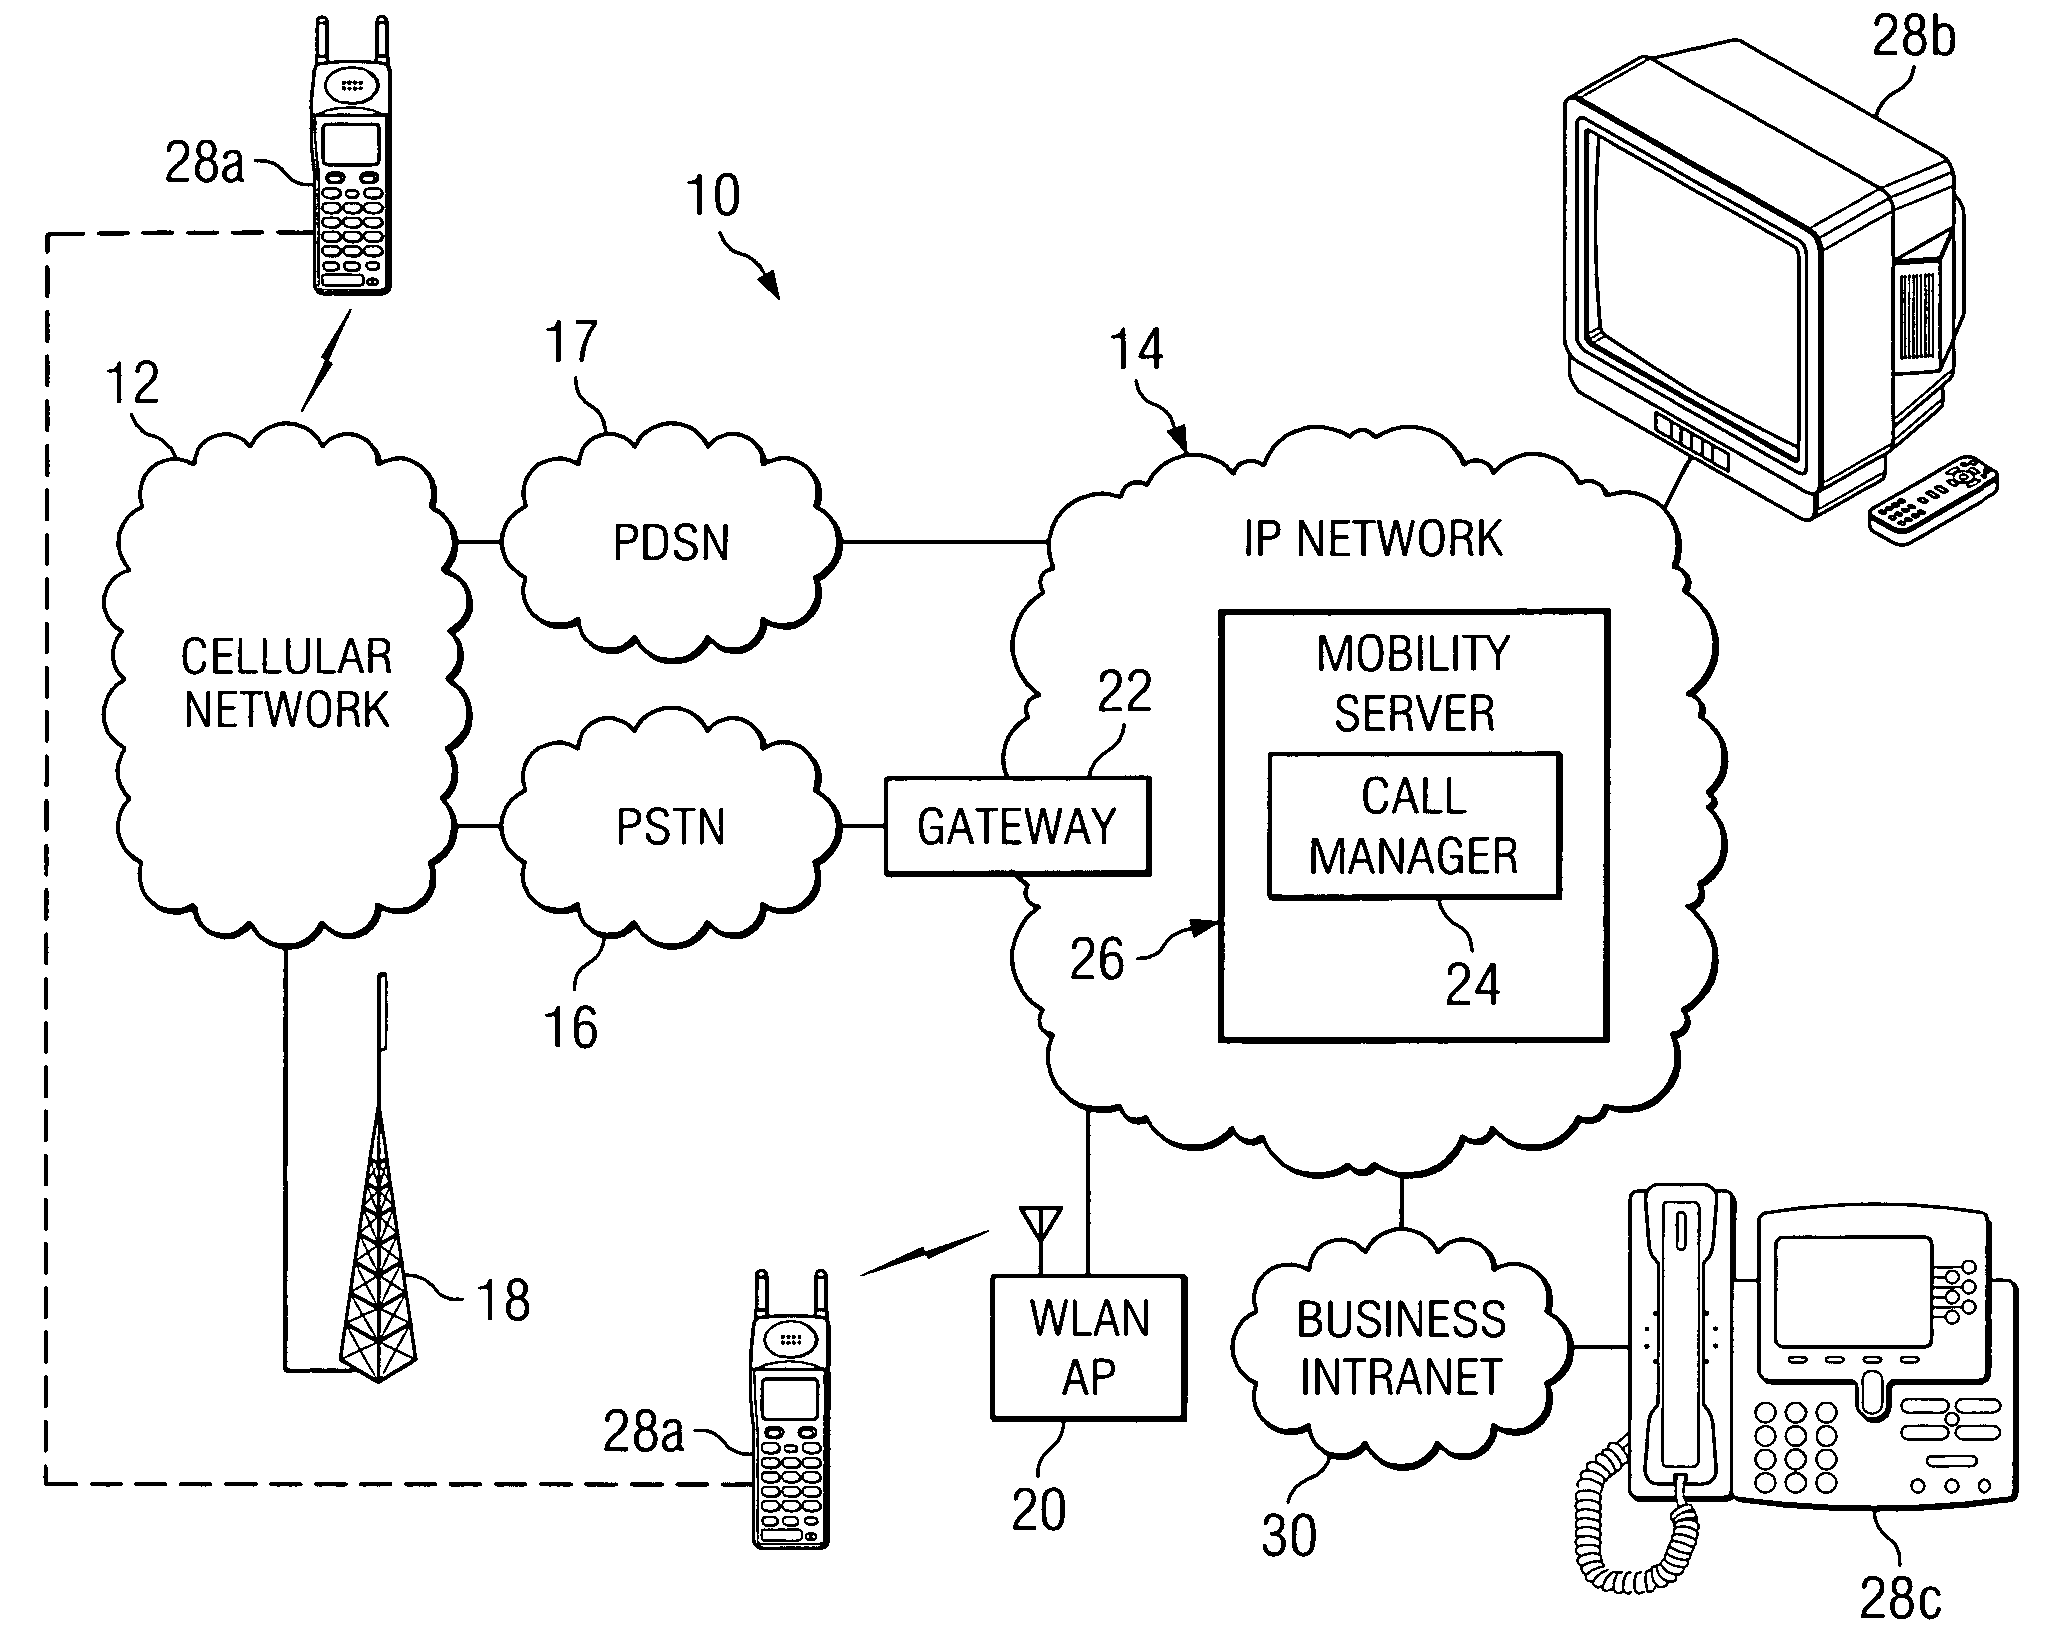 System and method for offering seamless connectivity across multiple devices in a communications environment